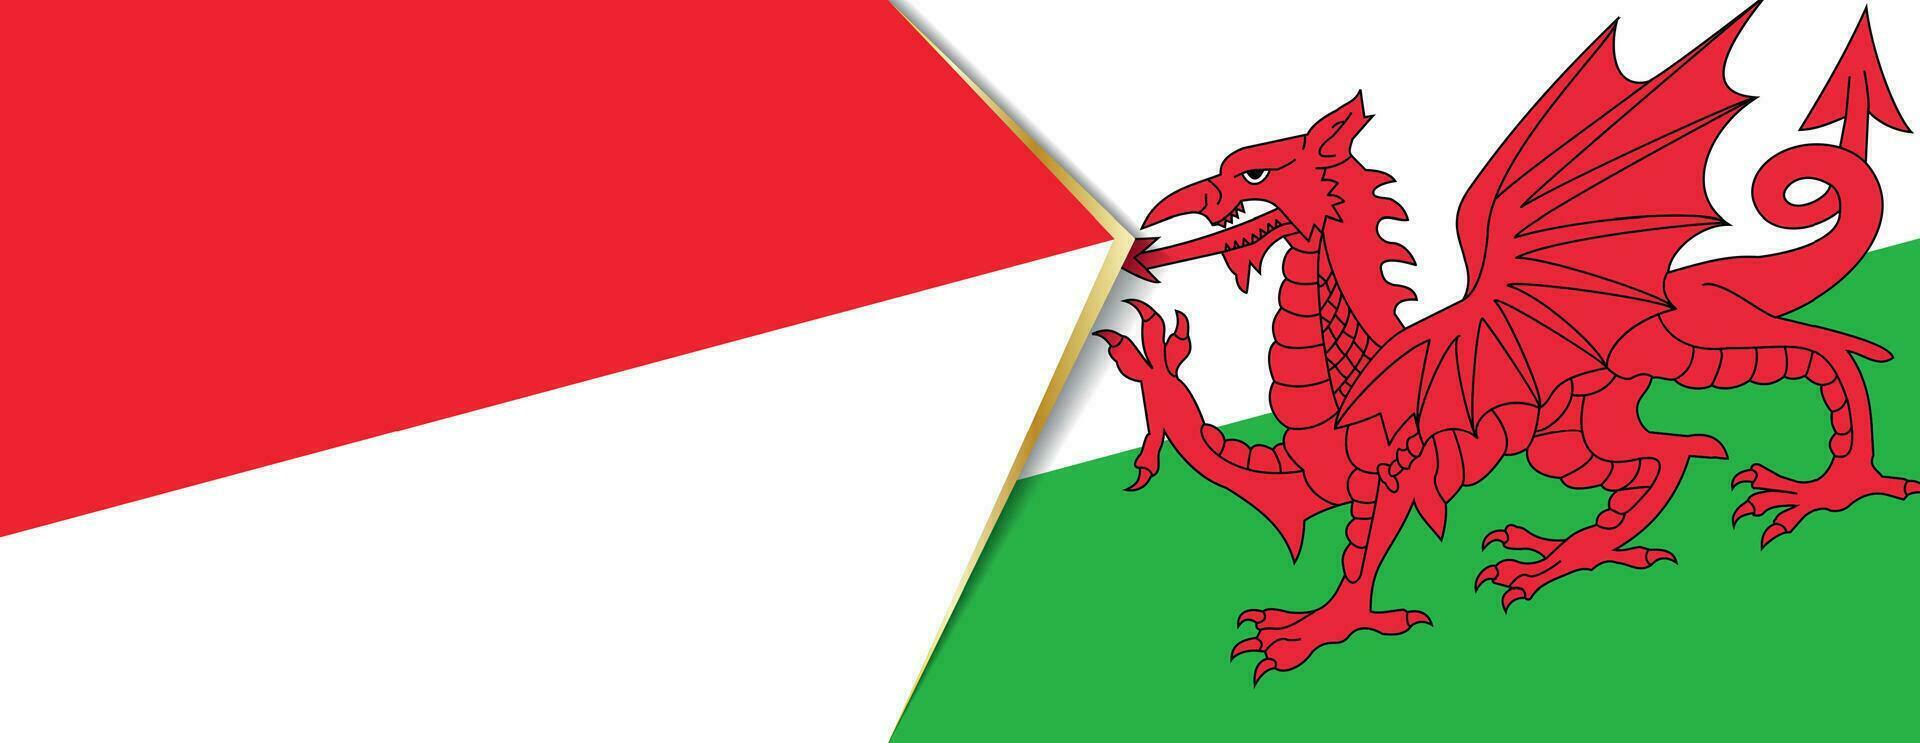 Indonesia and Wales flags, two vector flags.